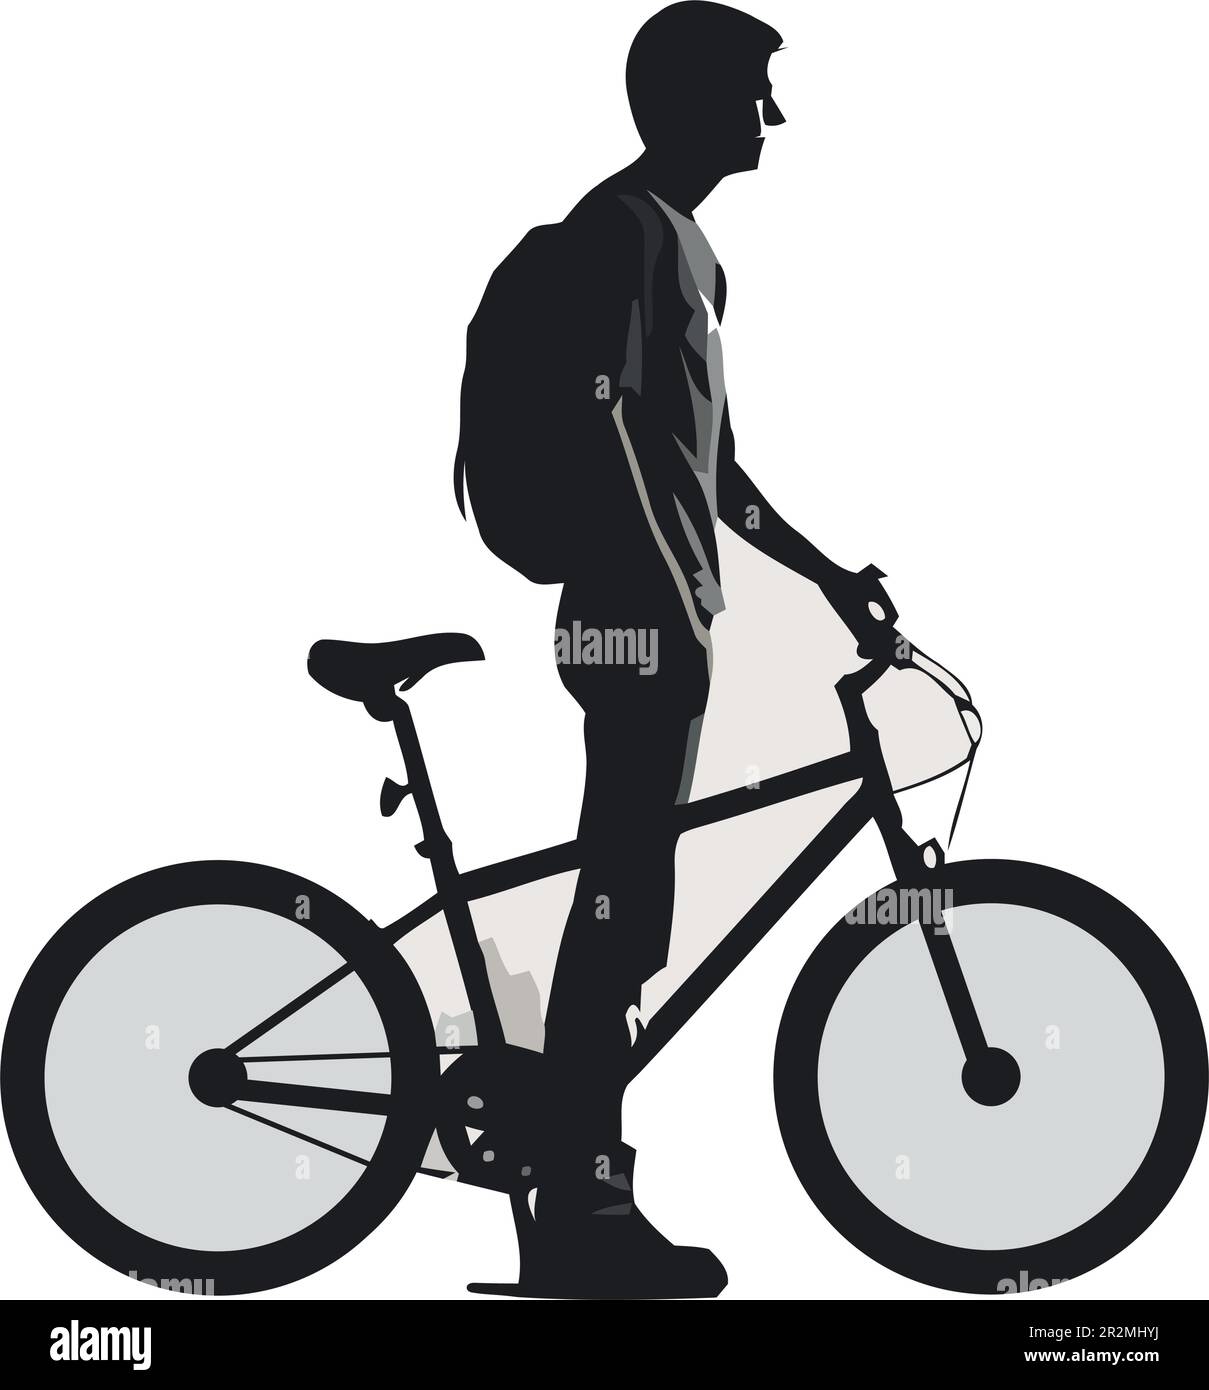 Silhouette cycling design over white Stock Vector